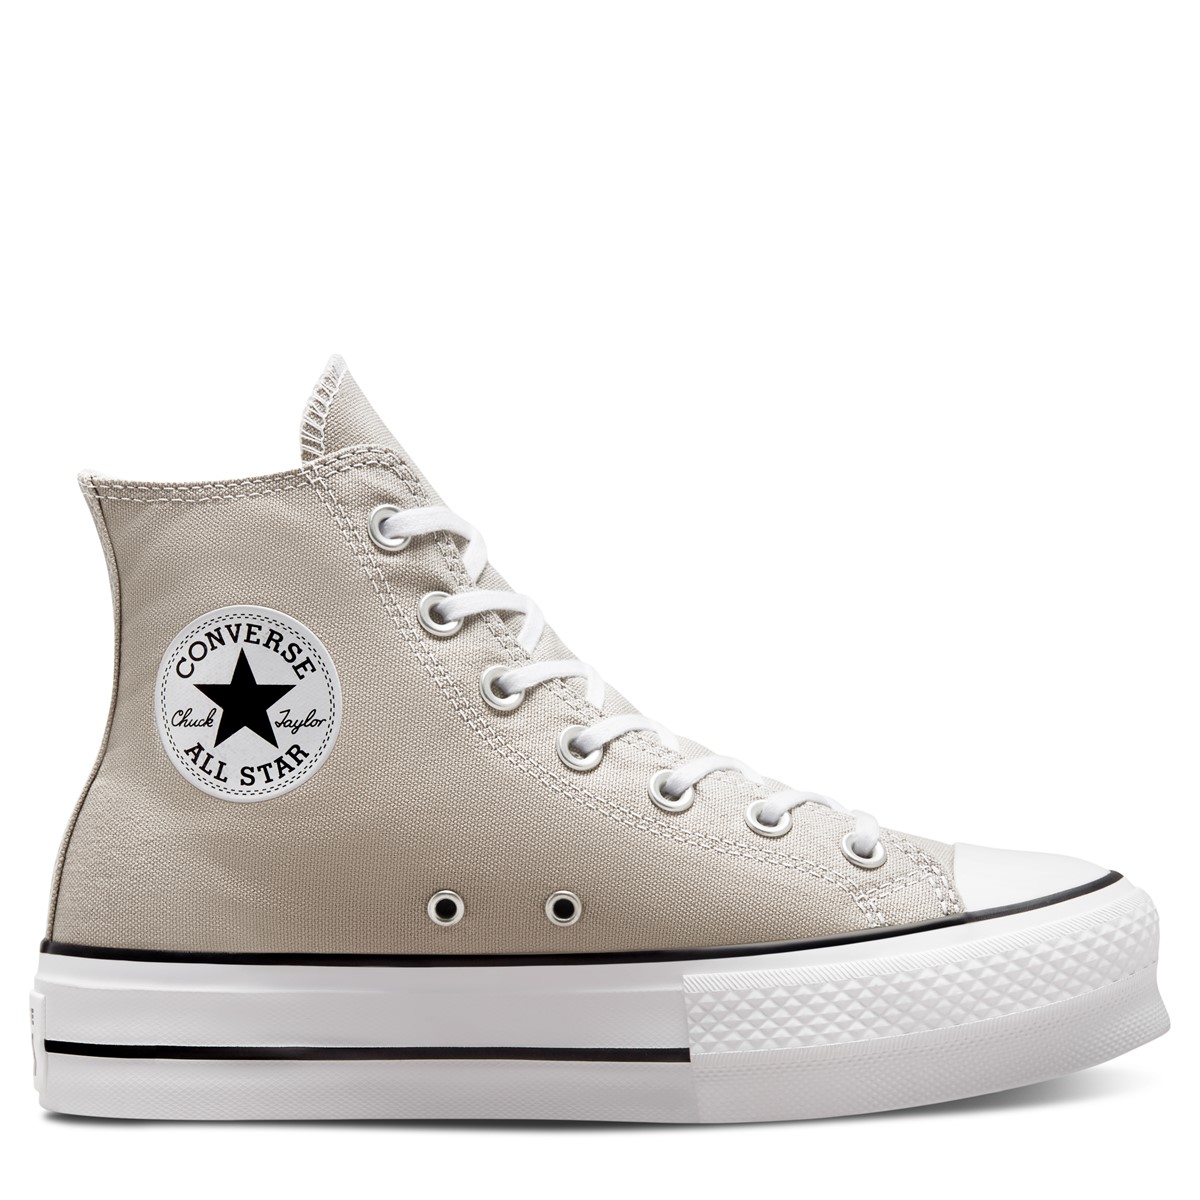 Women's Chuck Taylor All Star Lift Hi Sneakers in Taupe